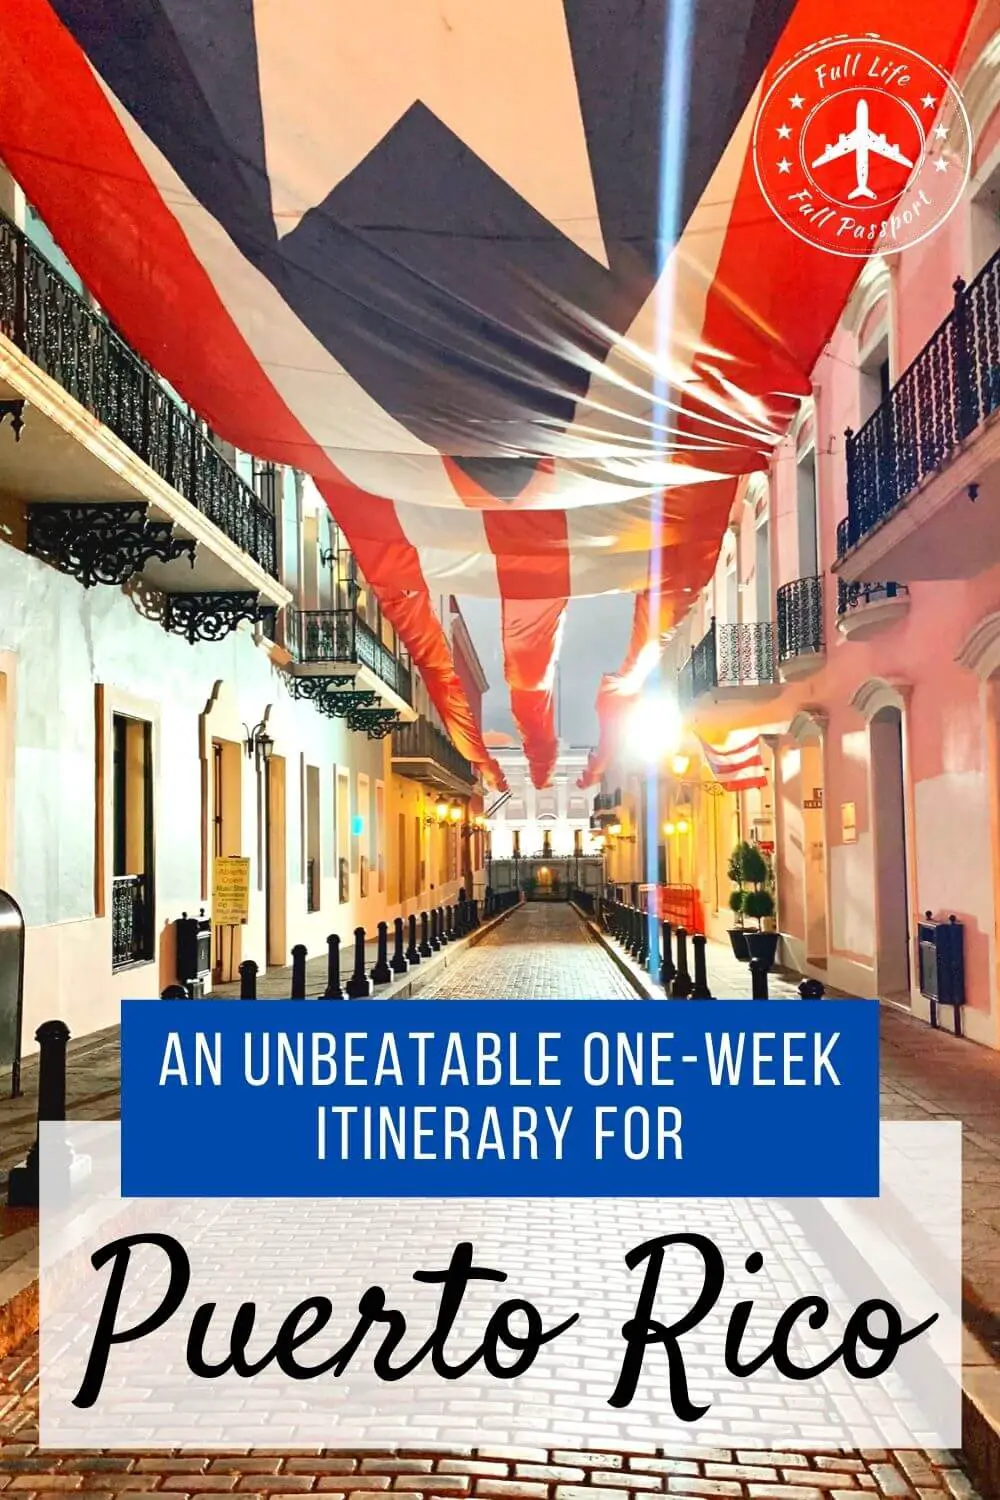 An Unbeatable One-Week Itinerary for Puerto Rico